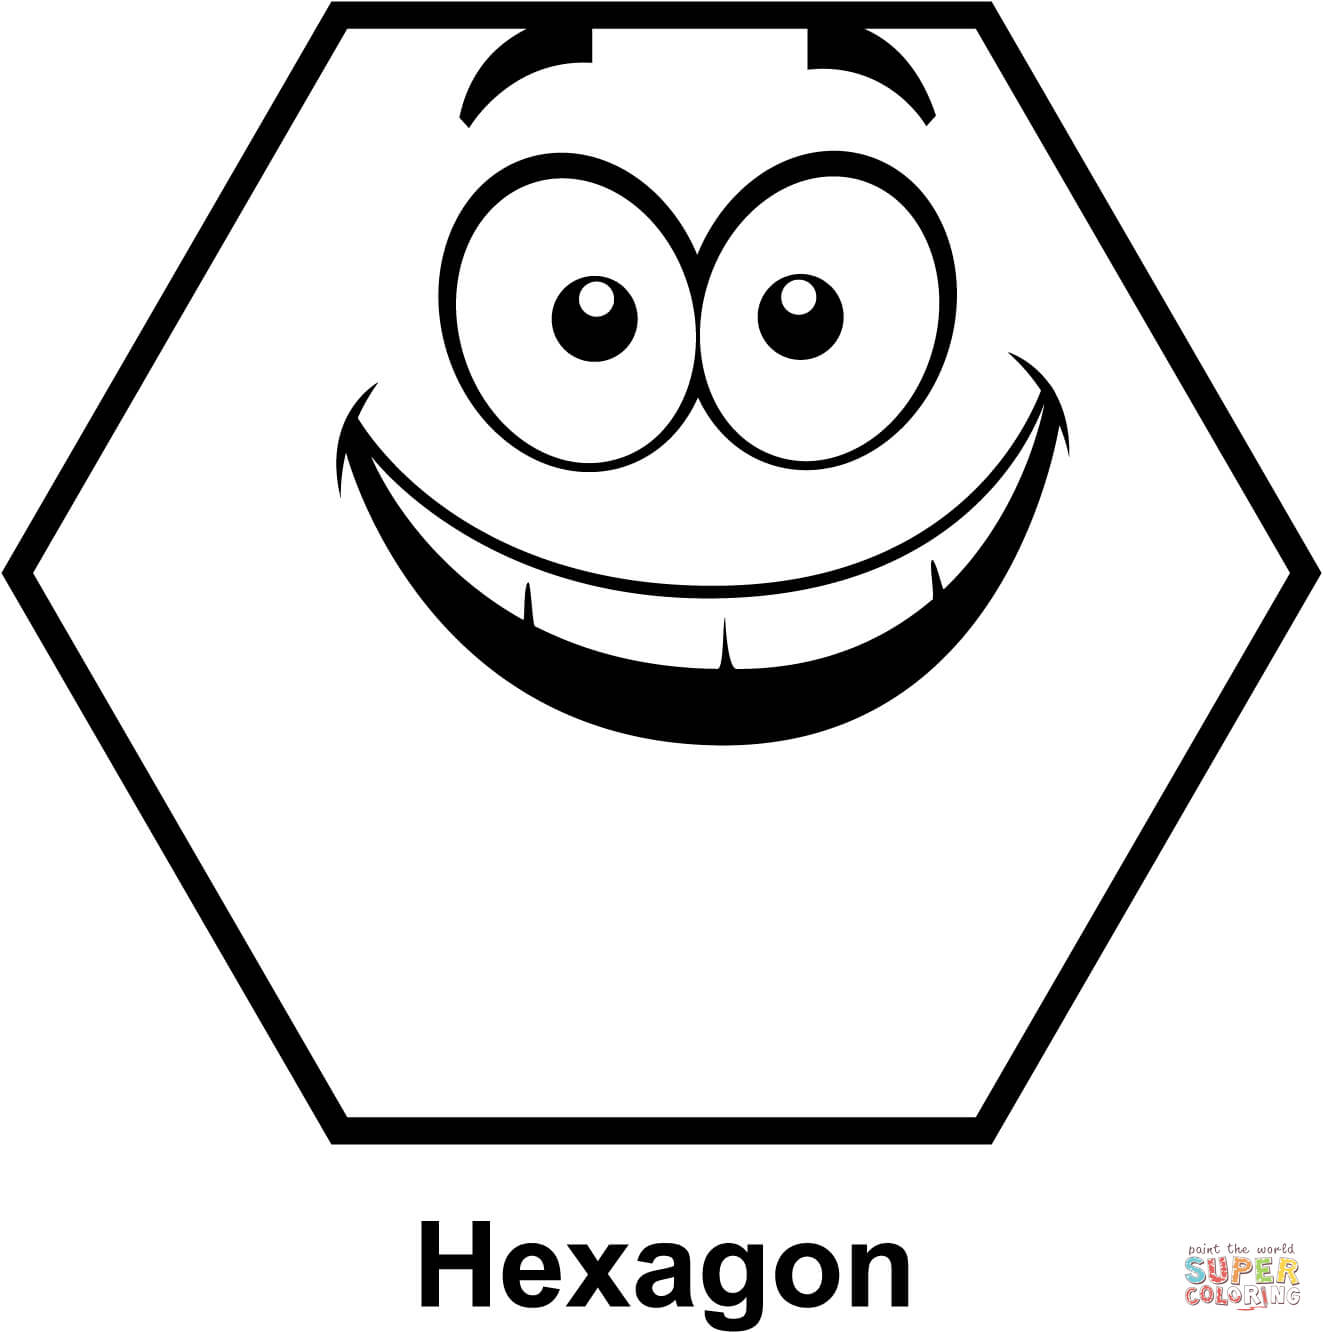 Hexagon cartoon face coloring page free printable coloring pages